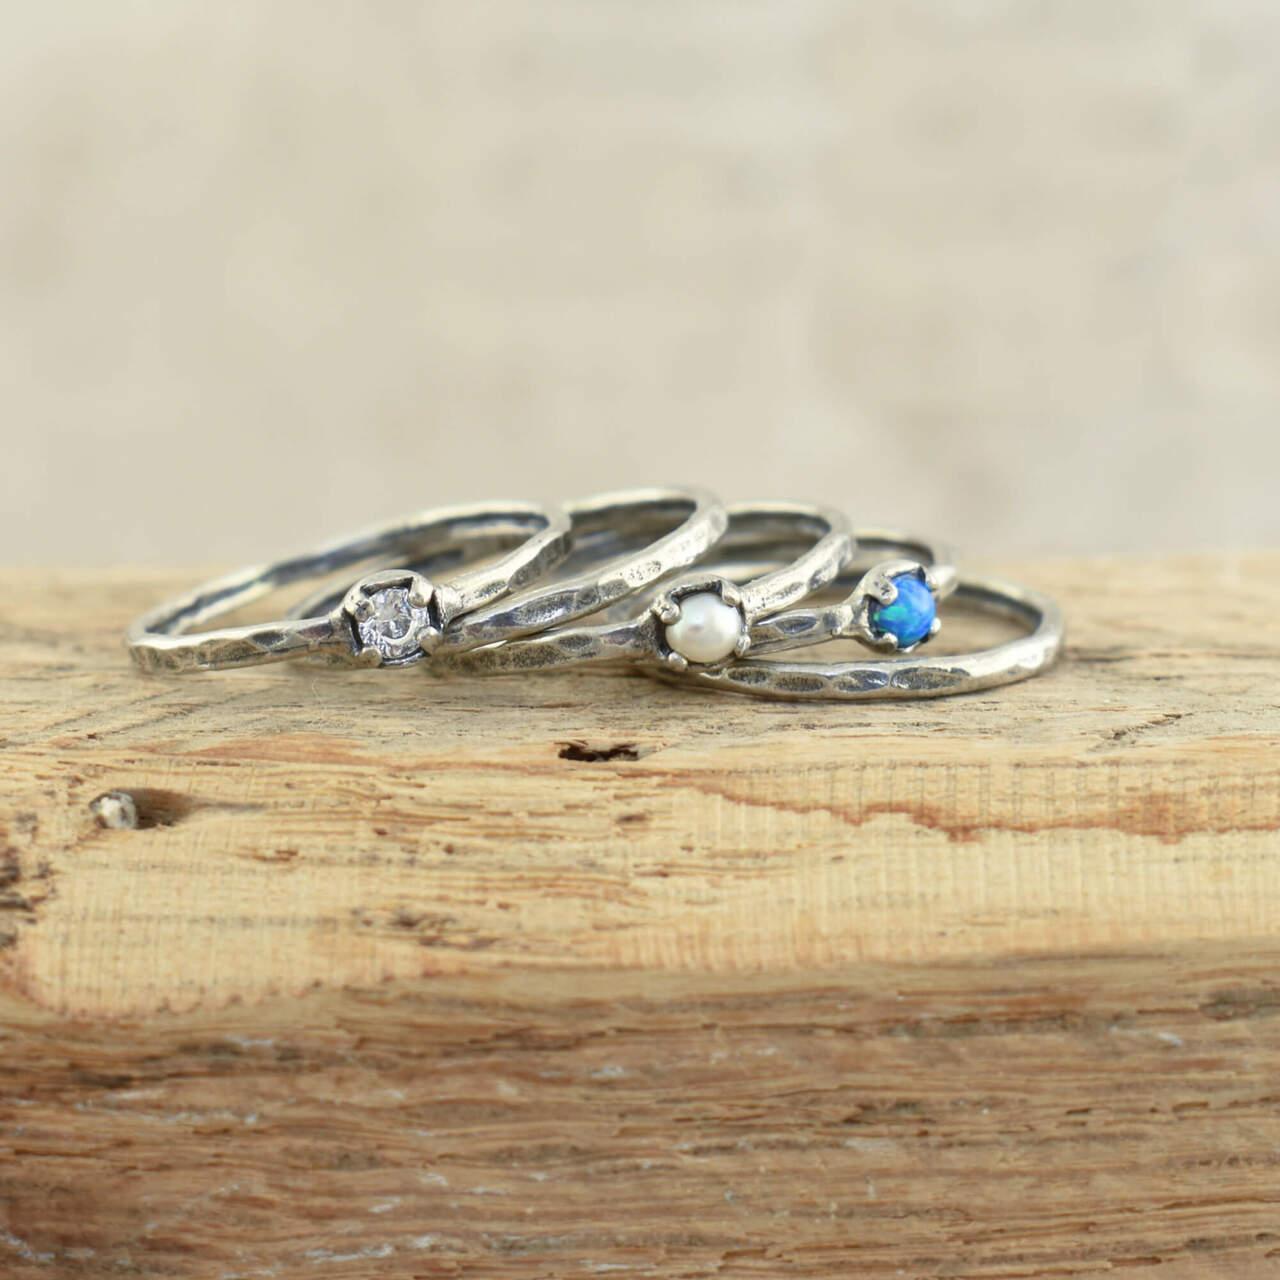 Whisper of Love Stackable Rings (price adjusts per ring quantity selected) - Inspiranza Designs